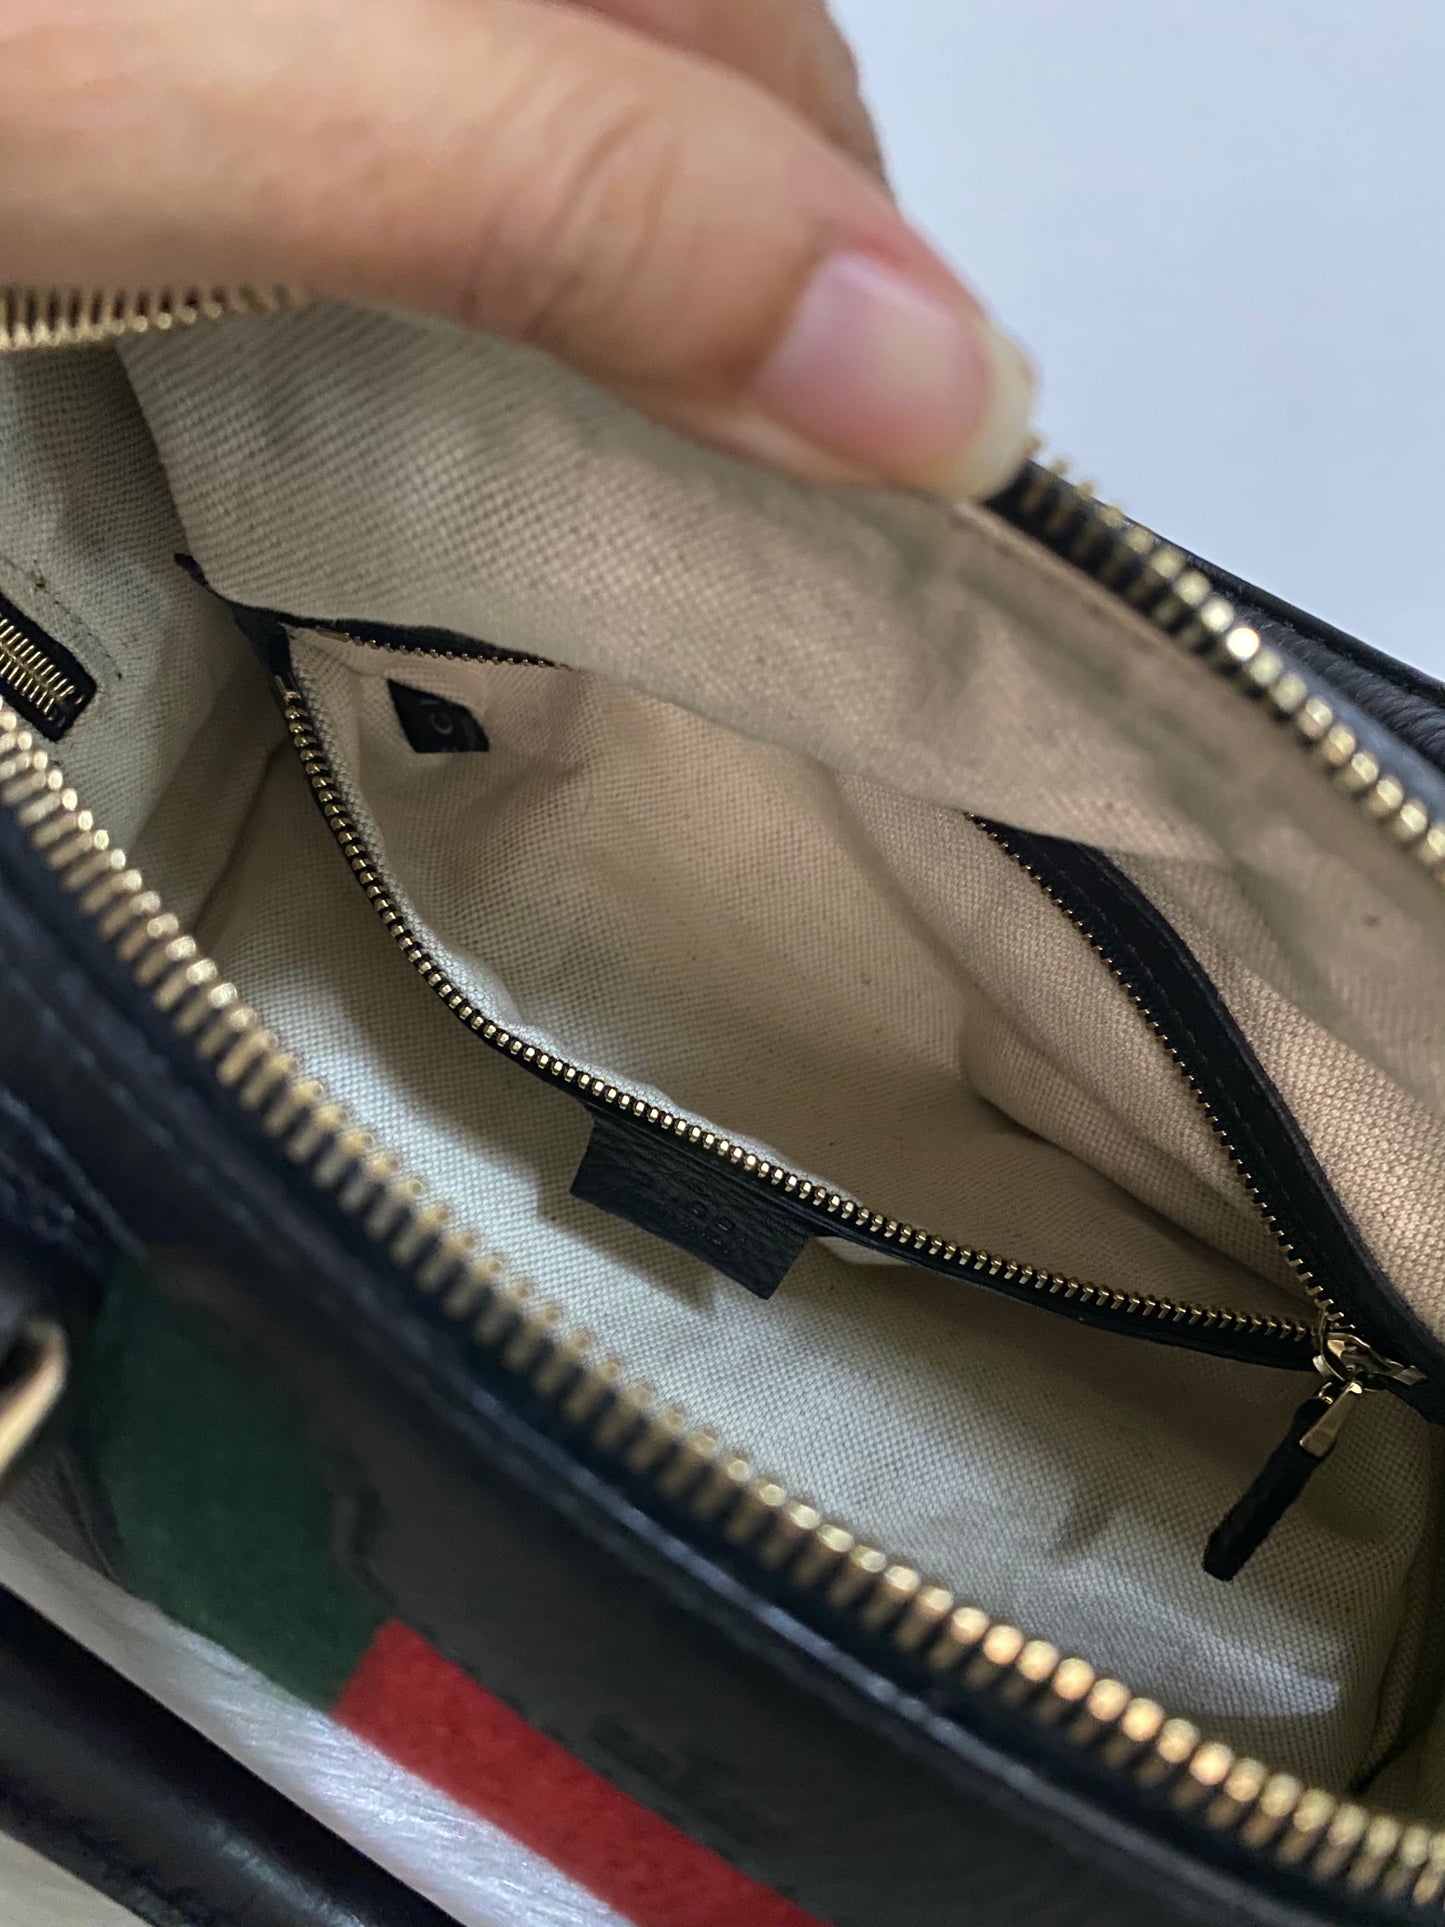 Authentic Pre Loved Gucci Leather Calfskin Boston Bag